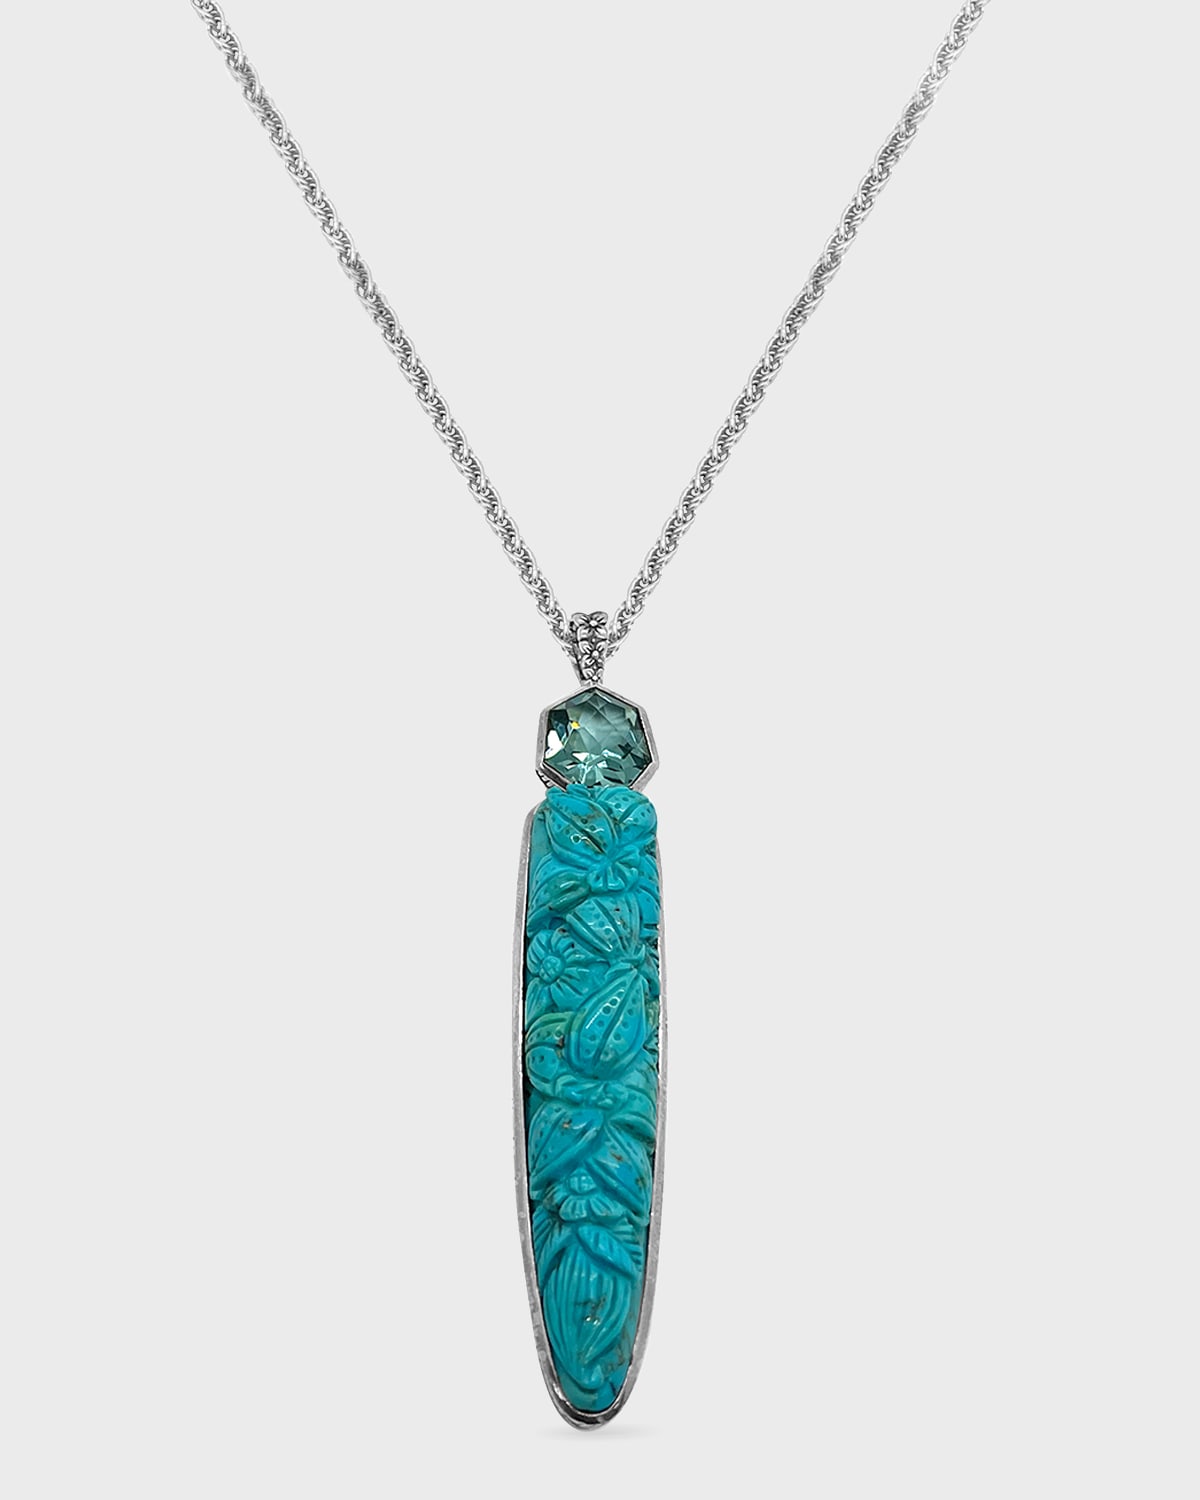 Turquoise and Galatical Blue Topaz Pendant Necklace